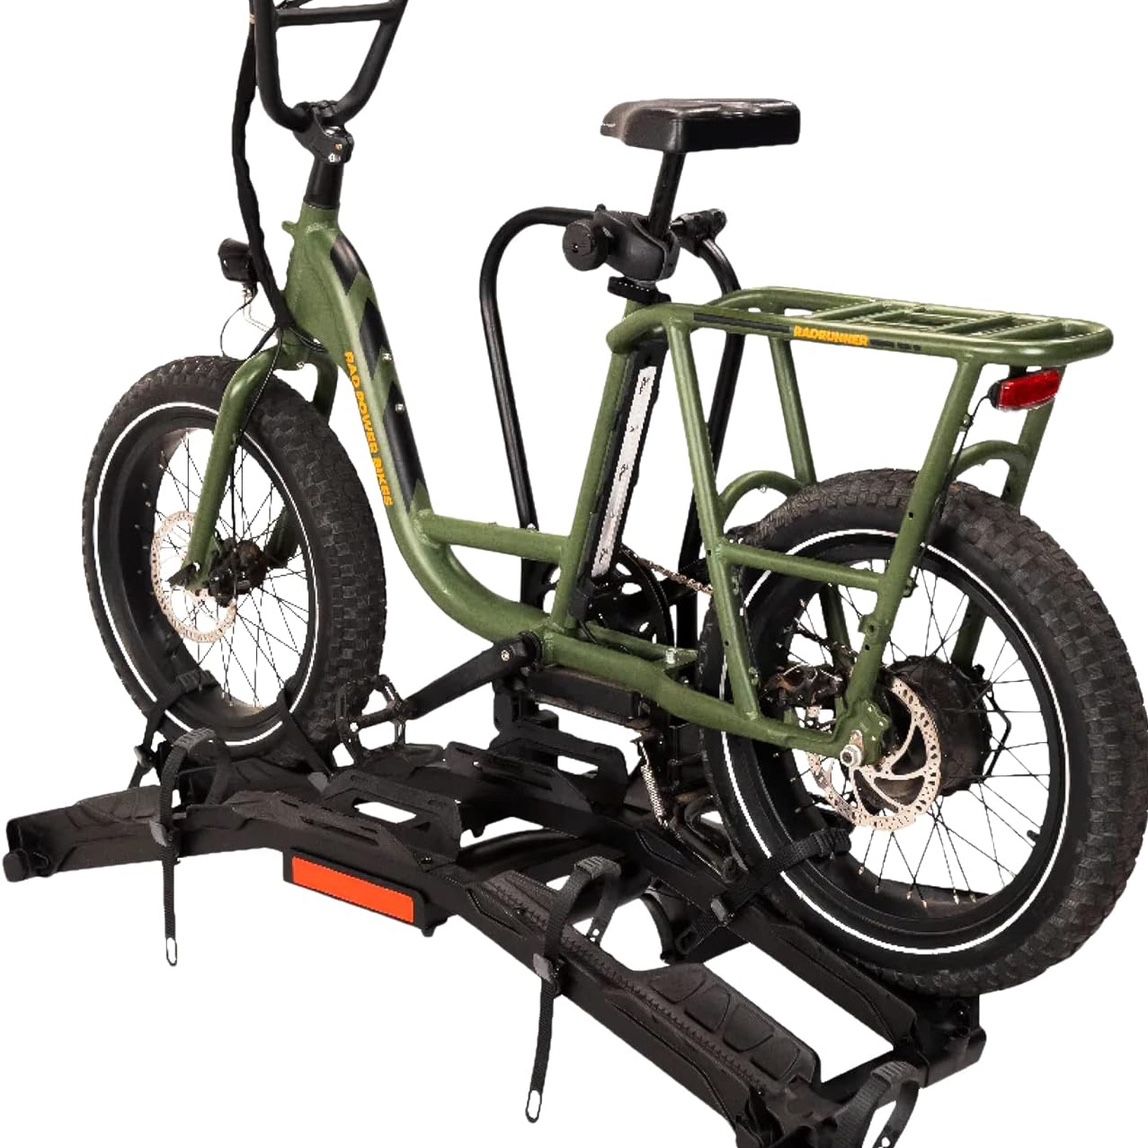 Hollywood Destination E Hitch Bike Rack With Ramps for Standard & E-Bikes